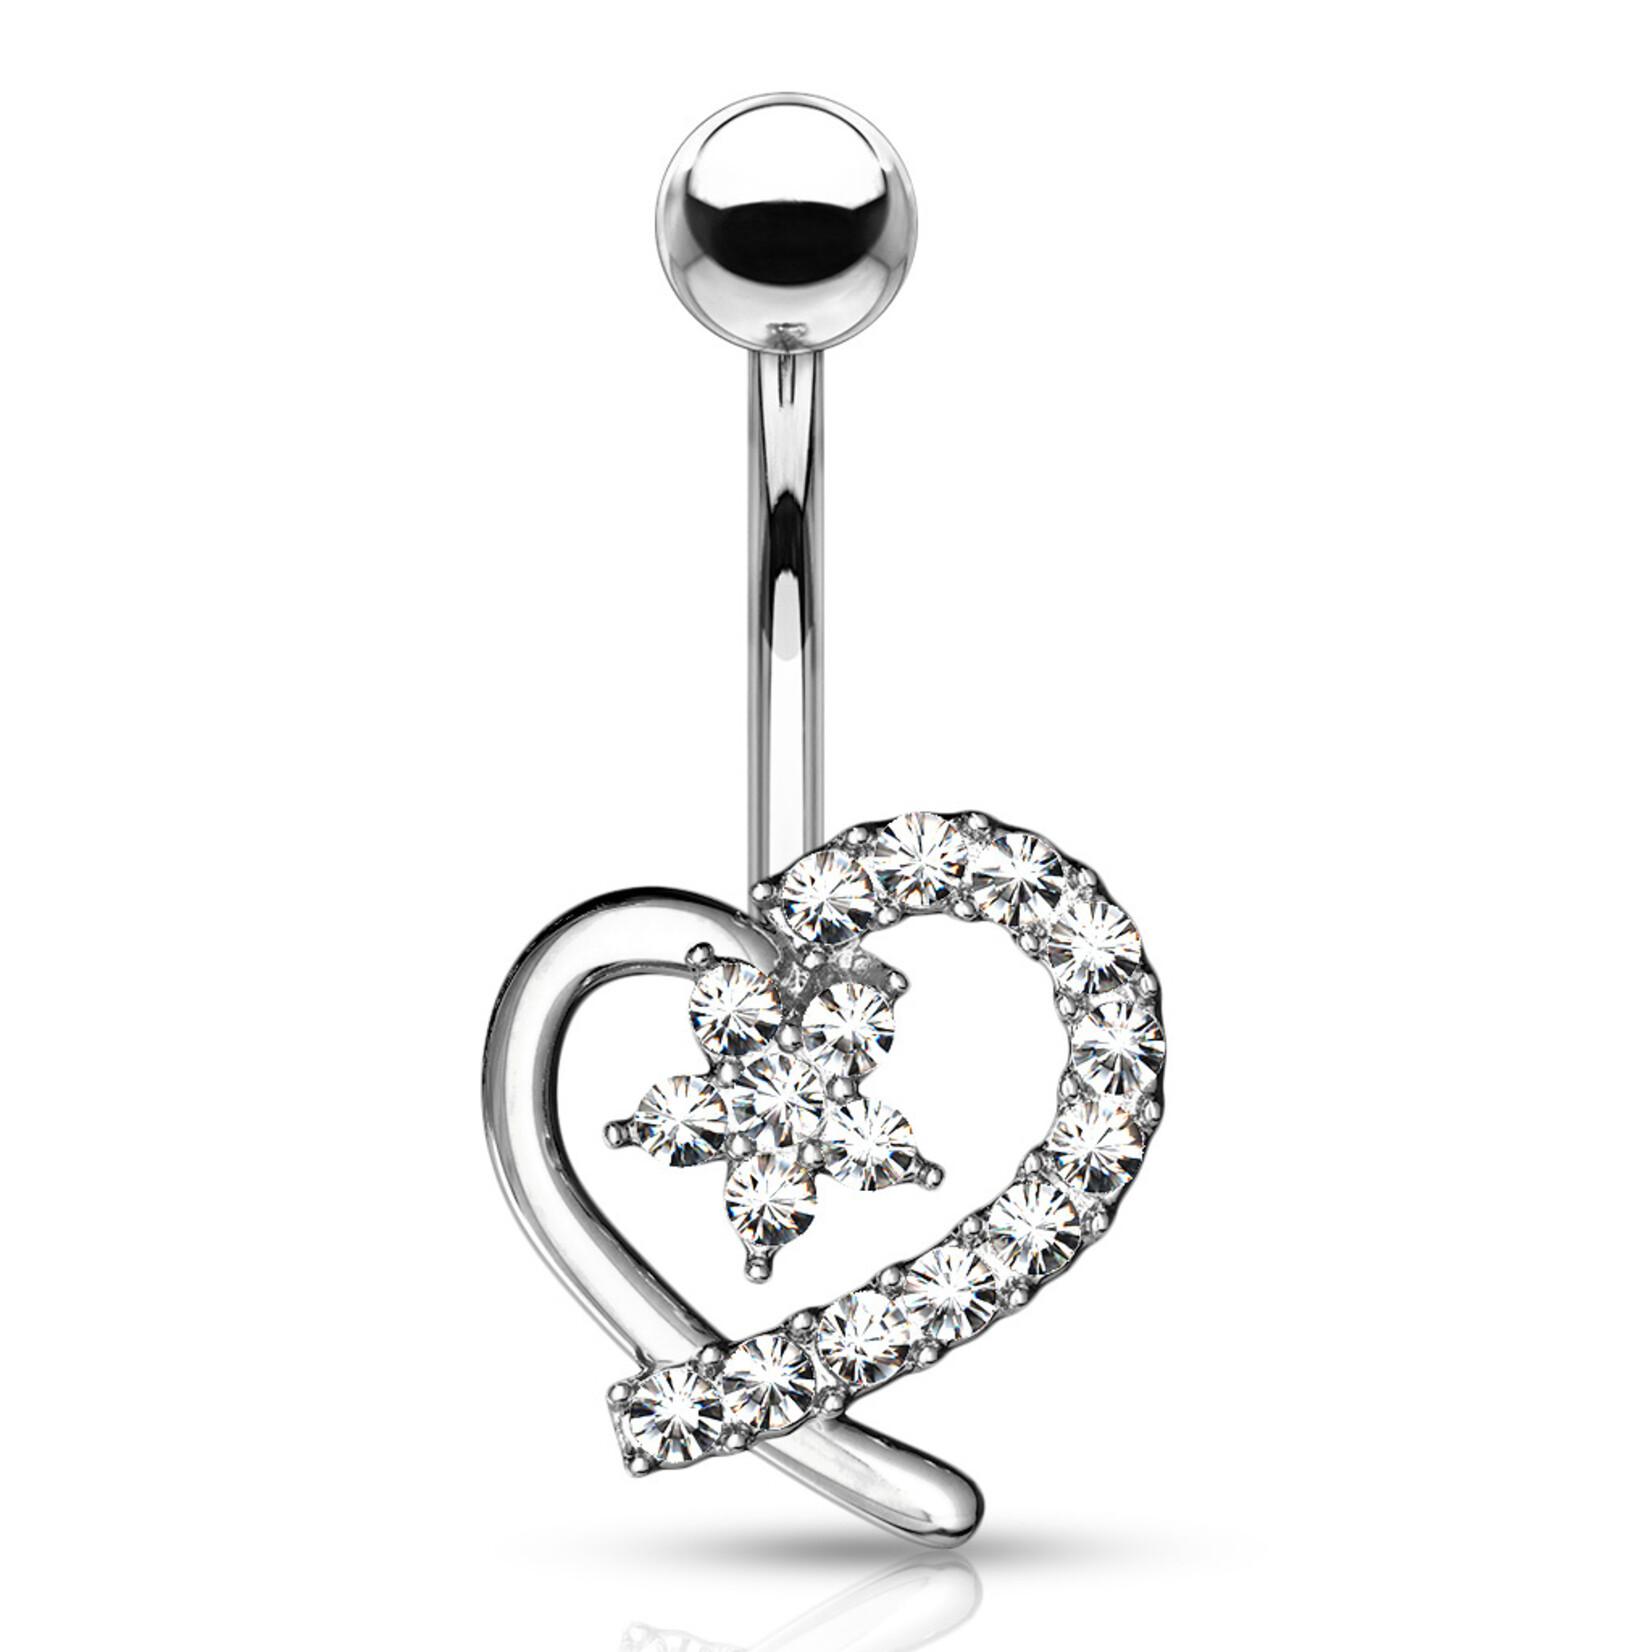 Hollywood Body Jewelry Paved Heart Navel Ring